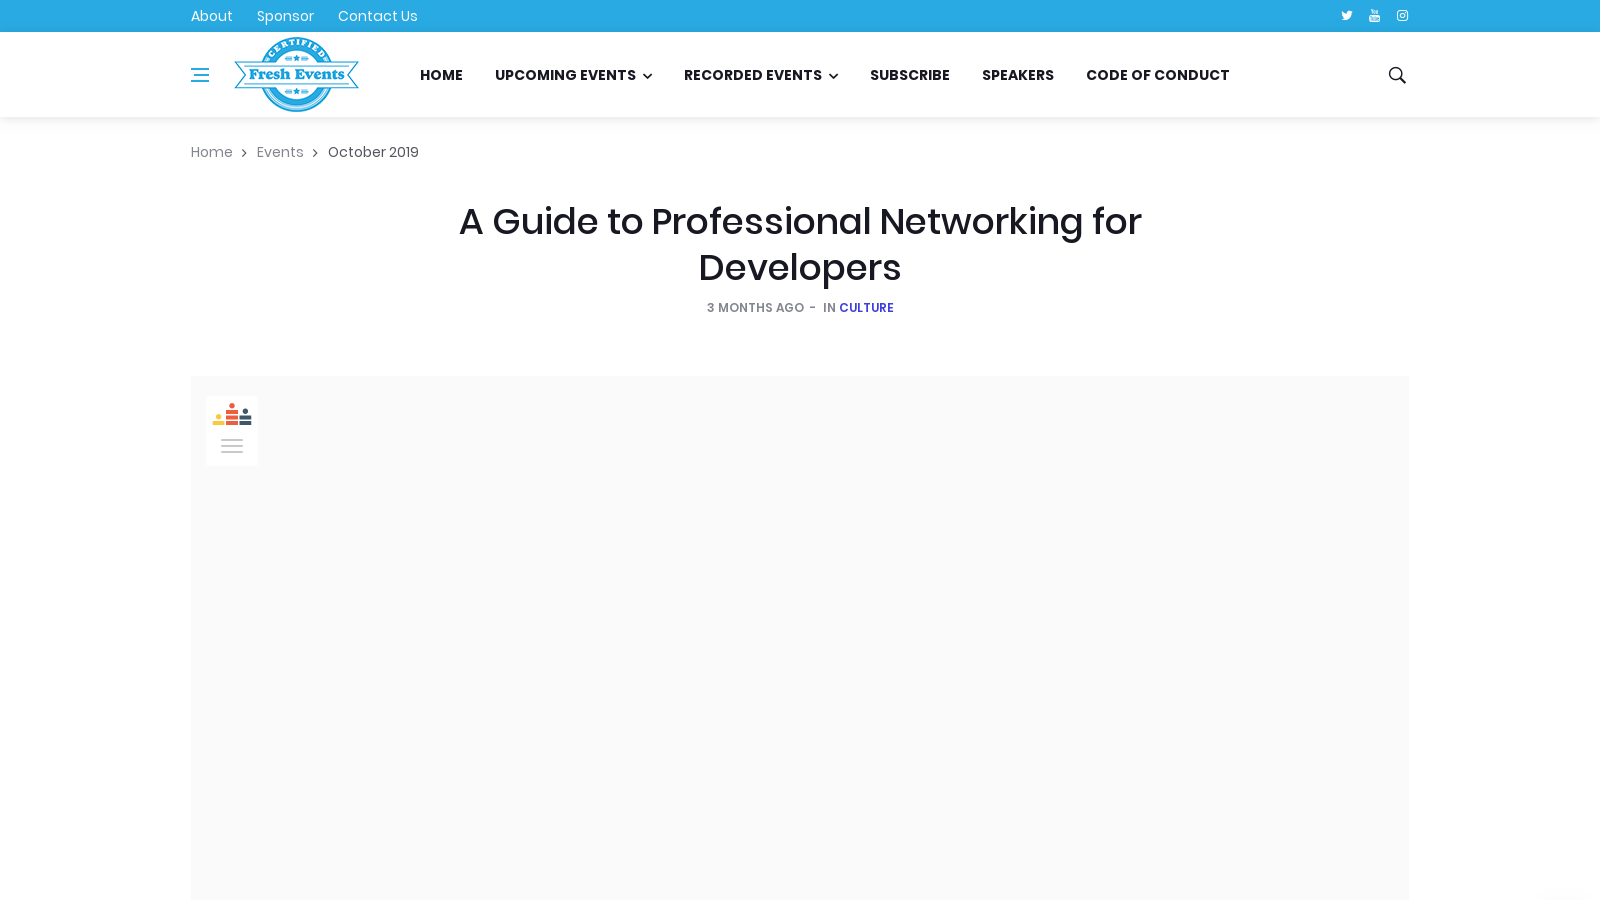 A Guide to Professional Networking for Developers